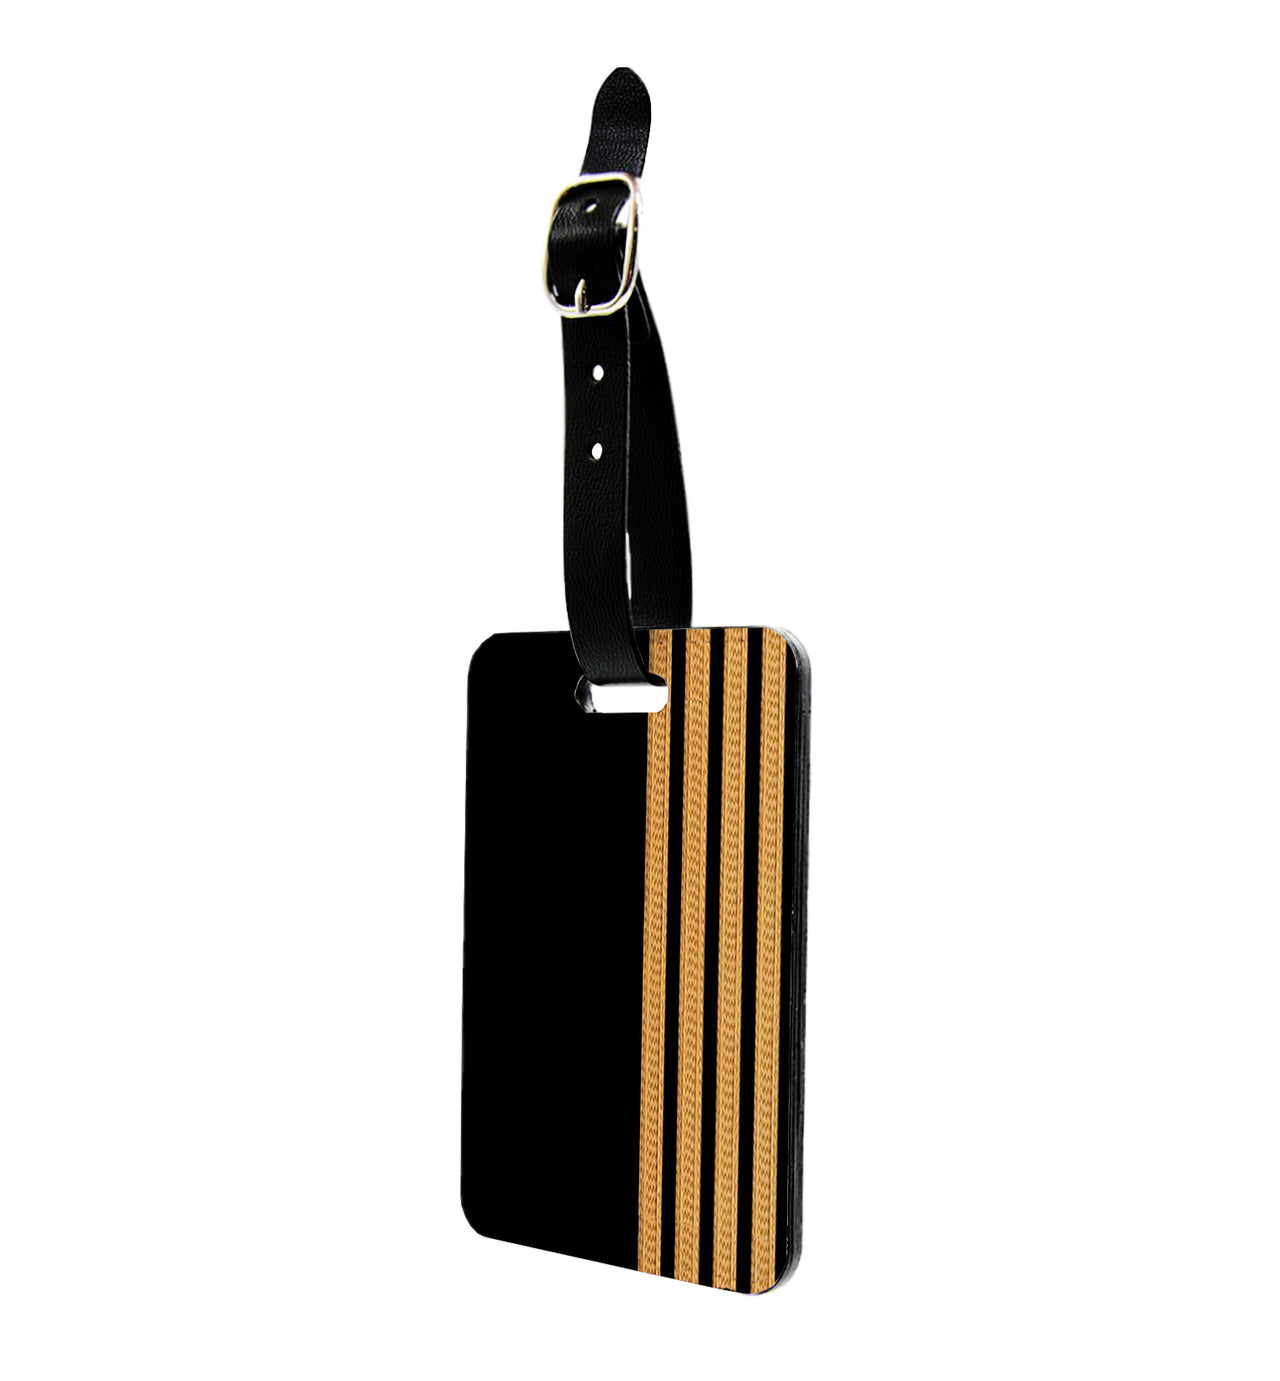 Special Golden Epaulettes (4,3,2 Lines) Designed Luggage Tag